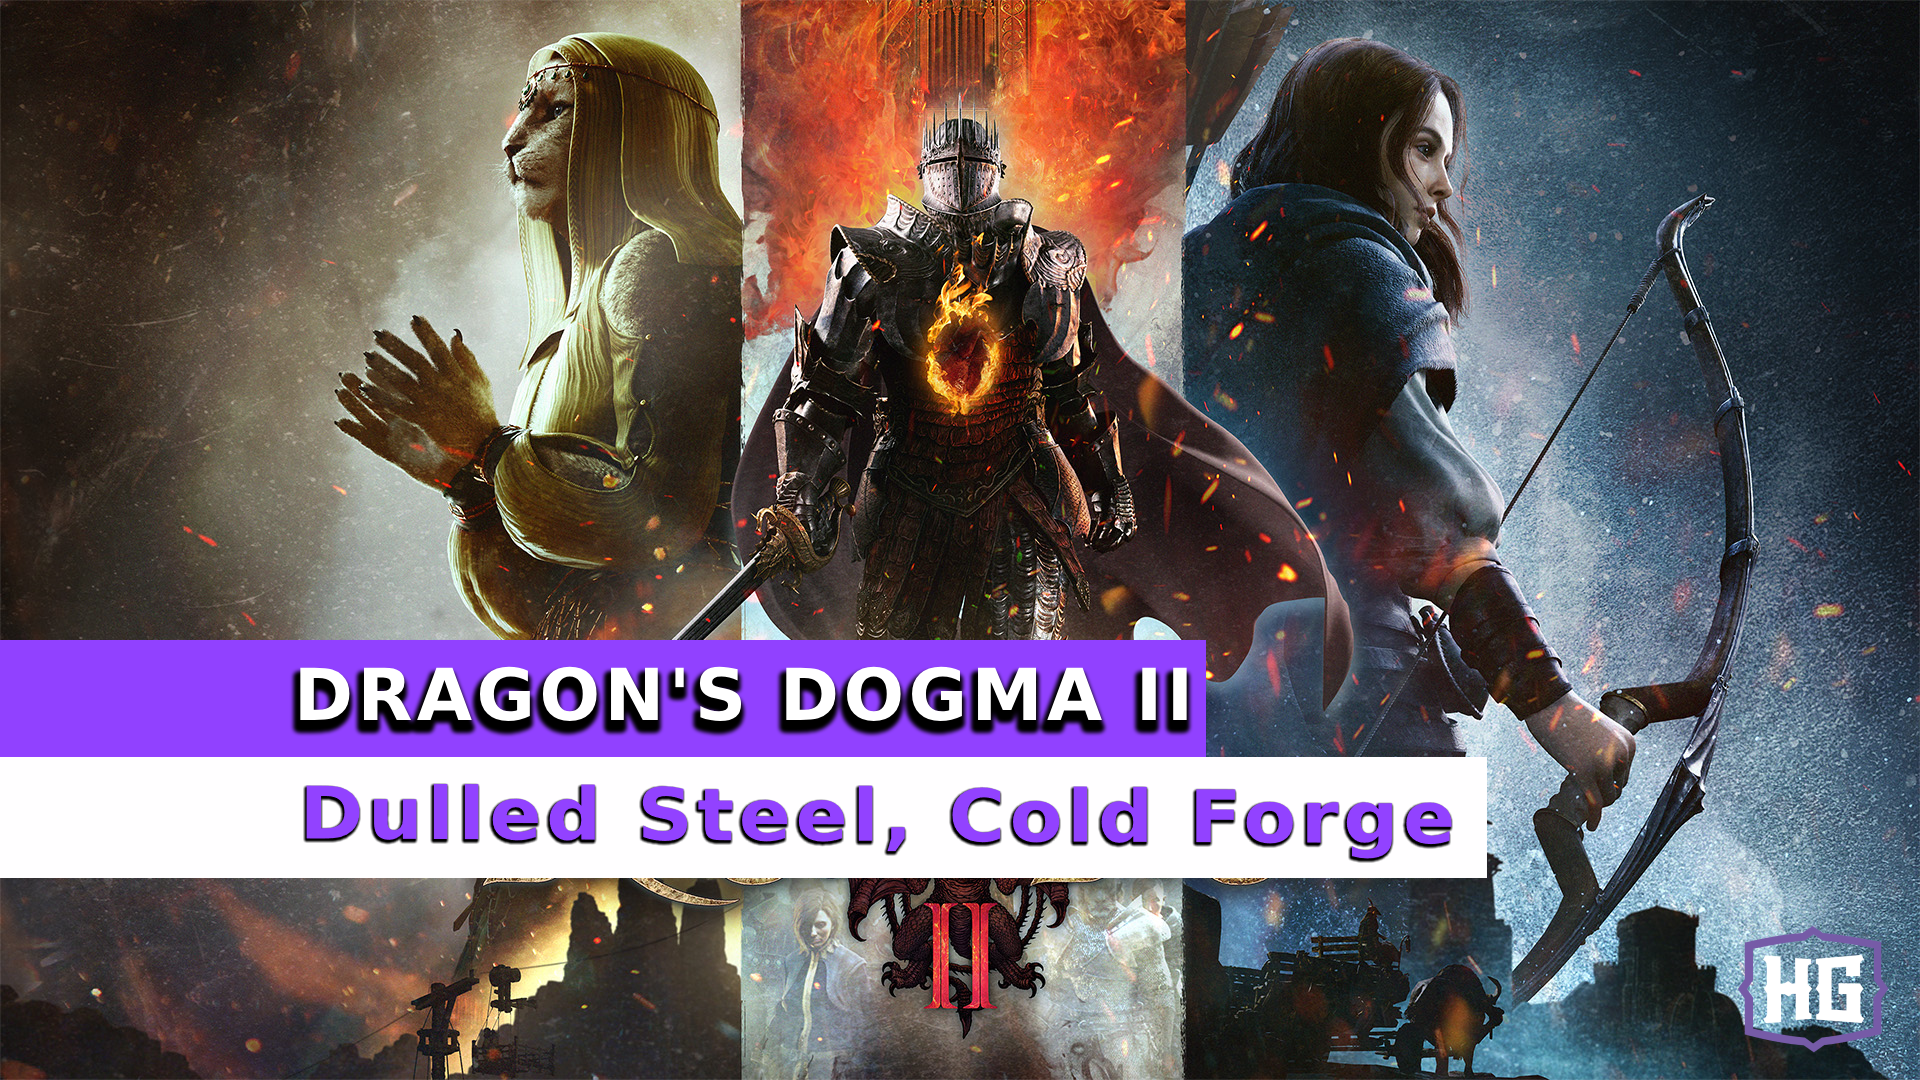 Dulled Steel, Cold Forge